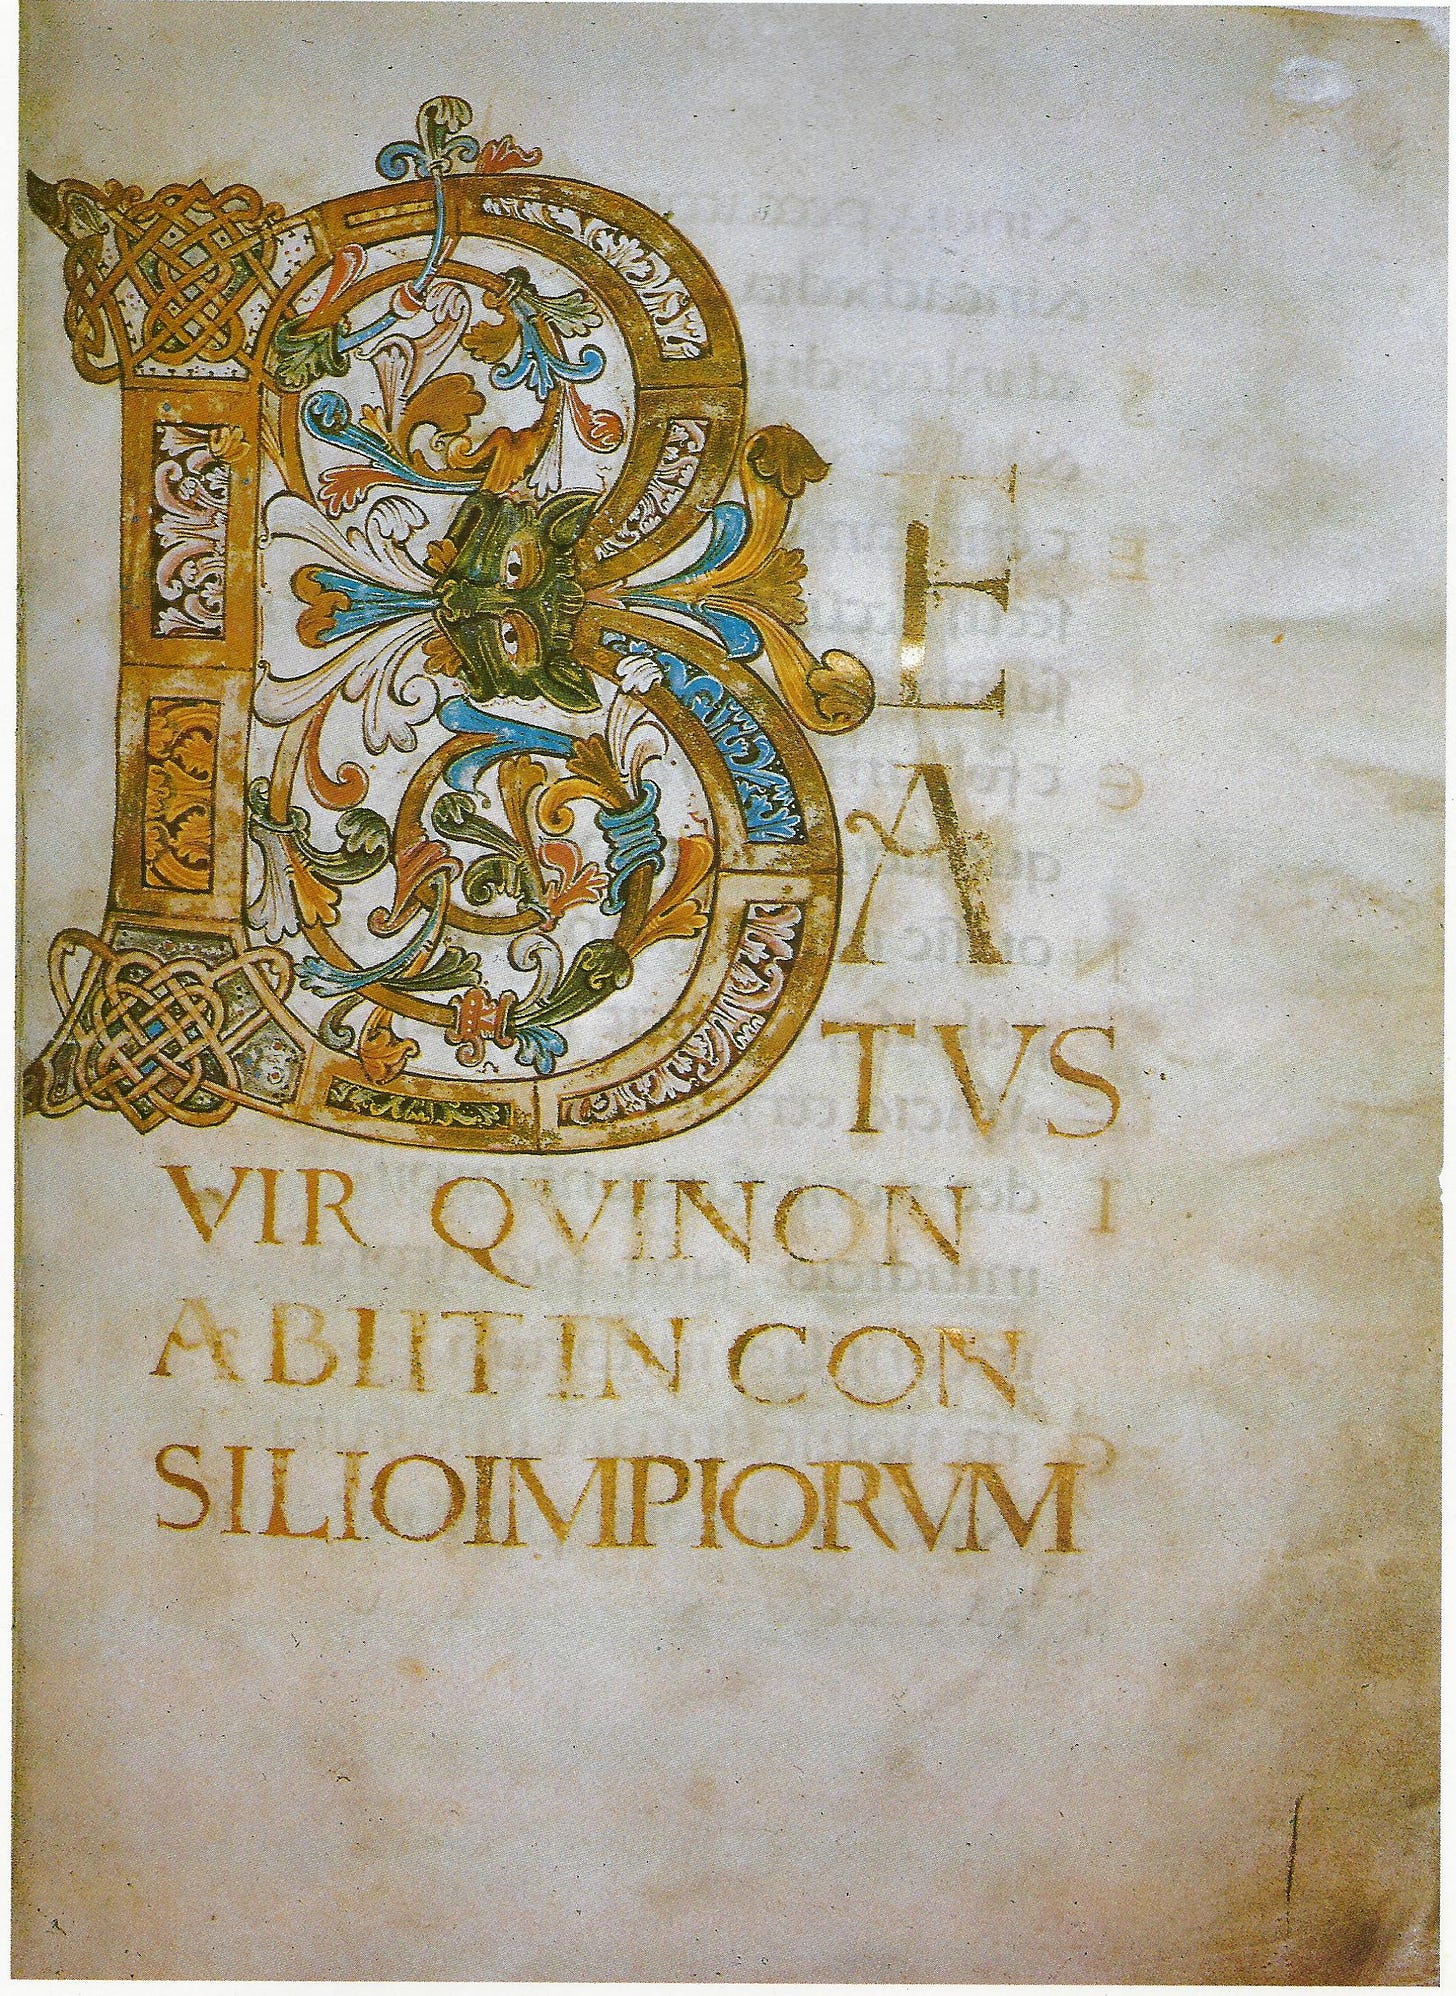 A richly illuminated page containing the first few words of Psalm 1 in Latin